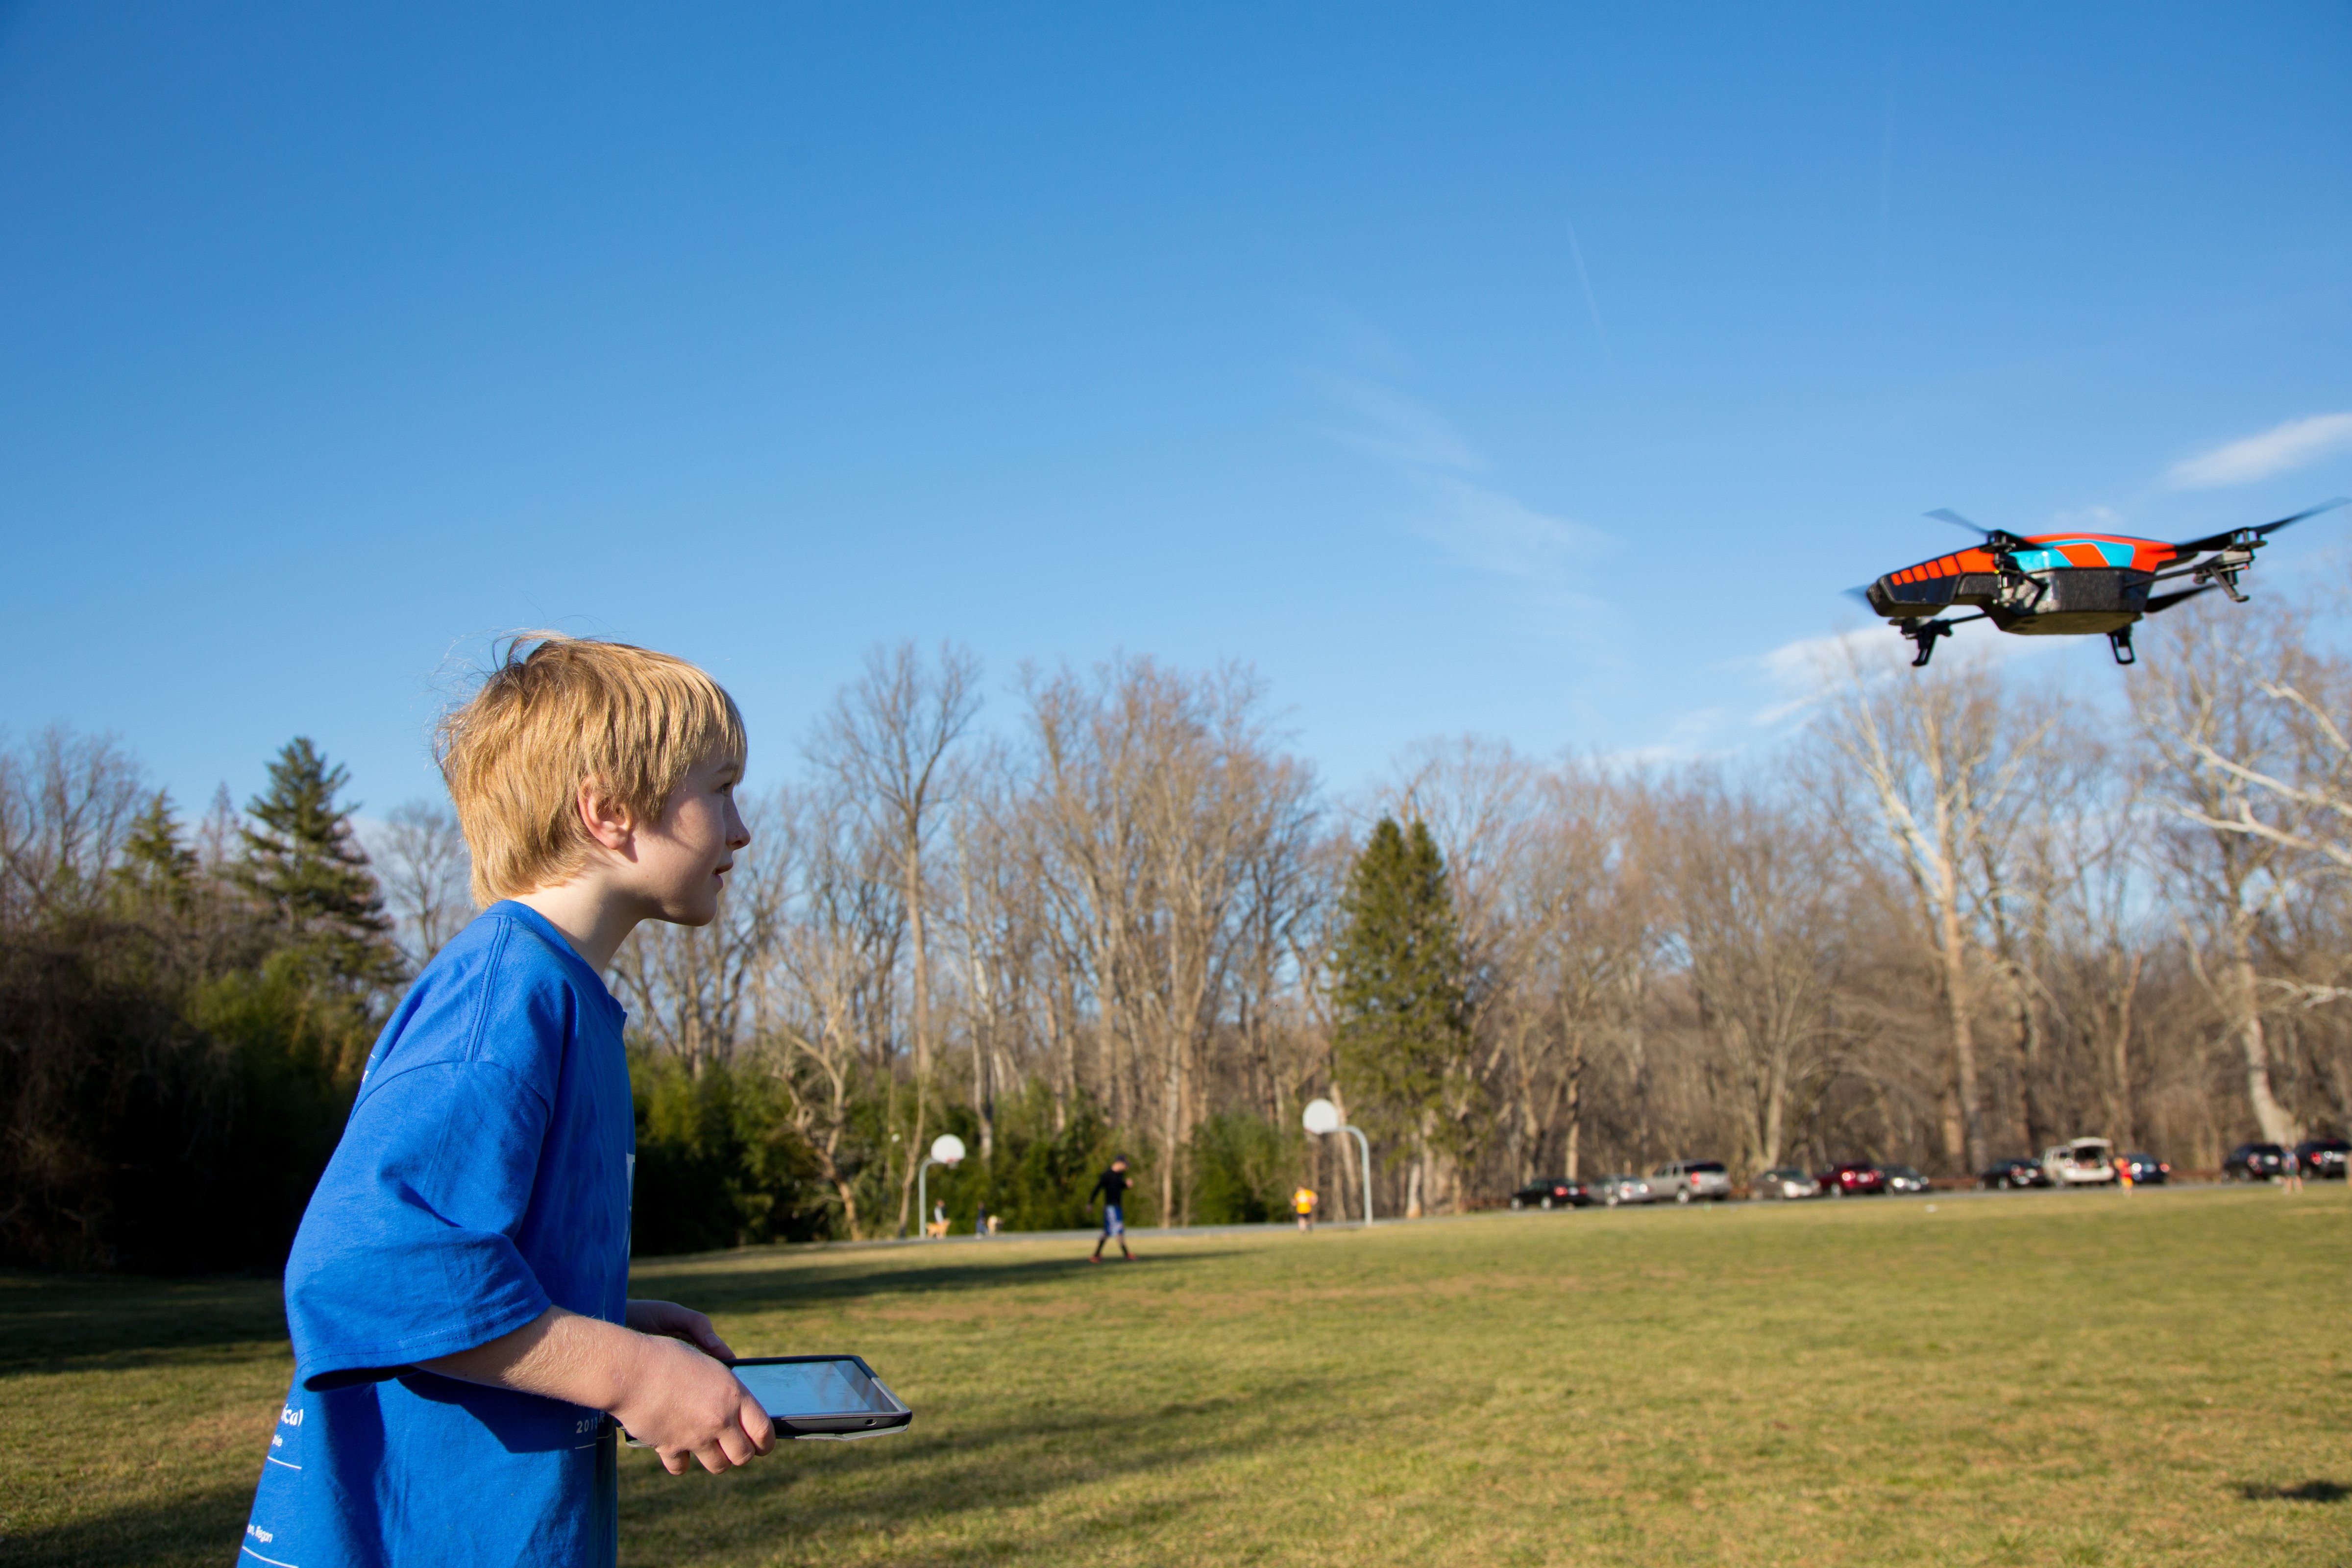 A nine year old boy flies his drone in a local park. (Skip Brown—Getty Images/National Geographic Creative)